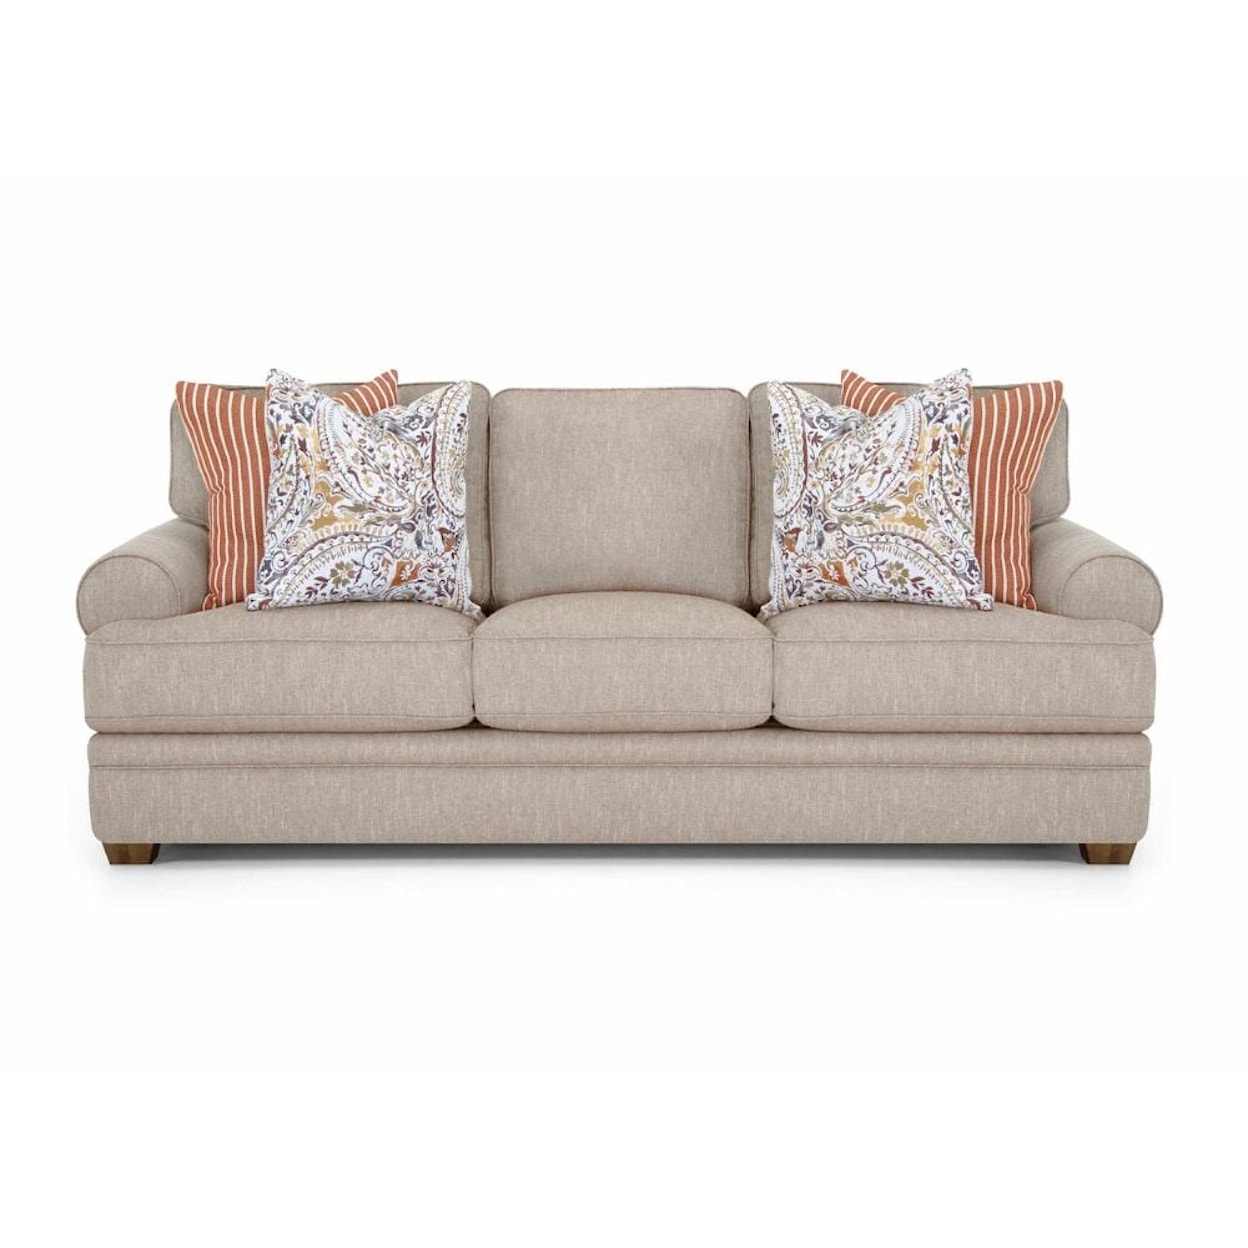 Franklin 915 Vermont Stationary Living Room Group